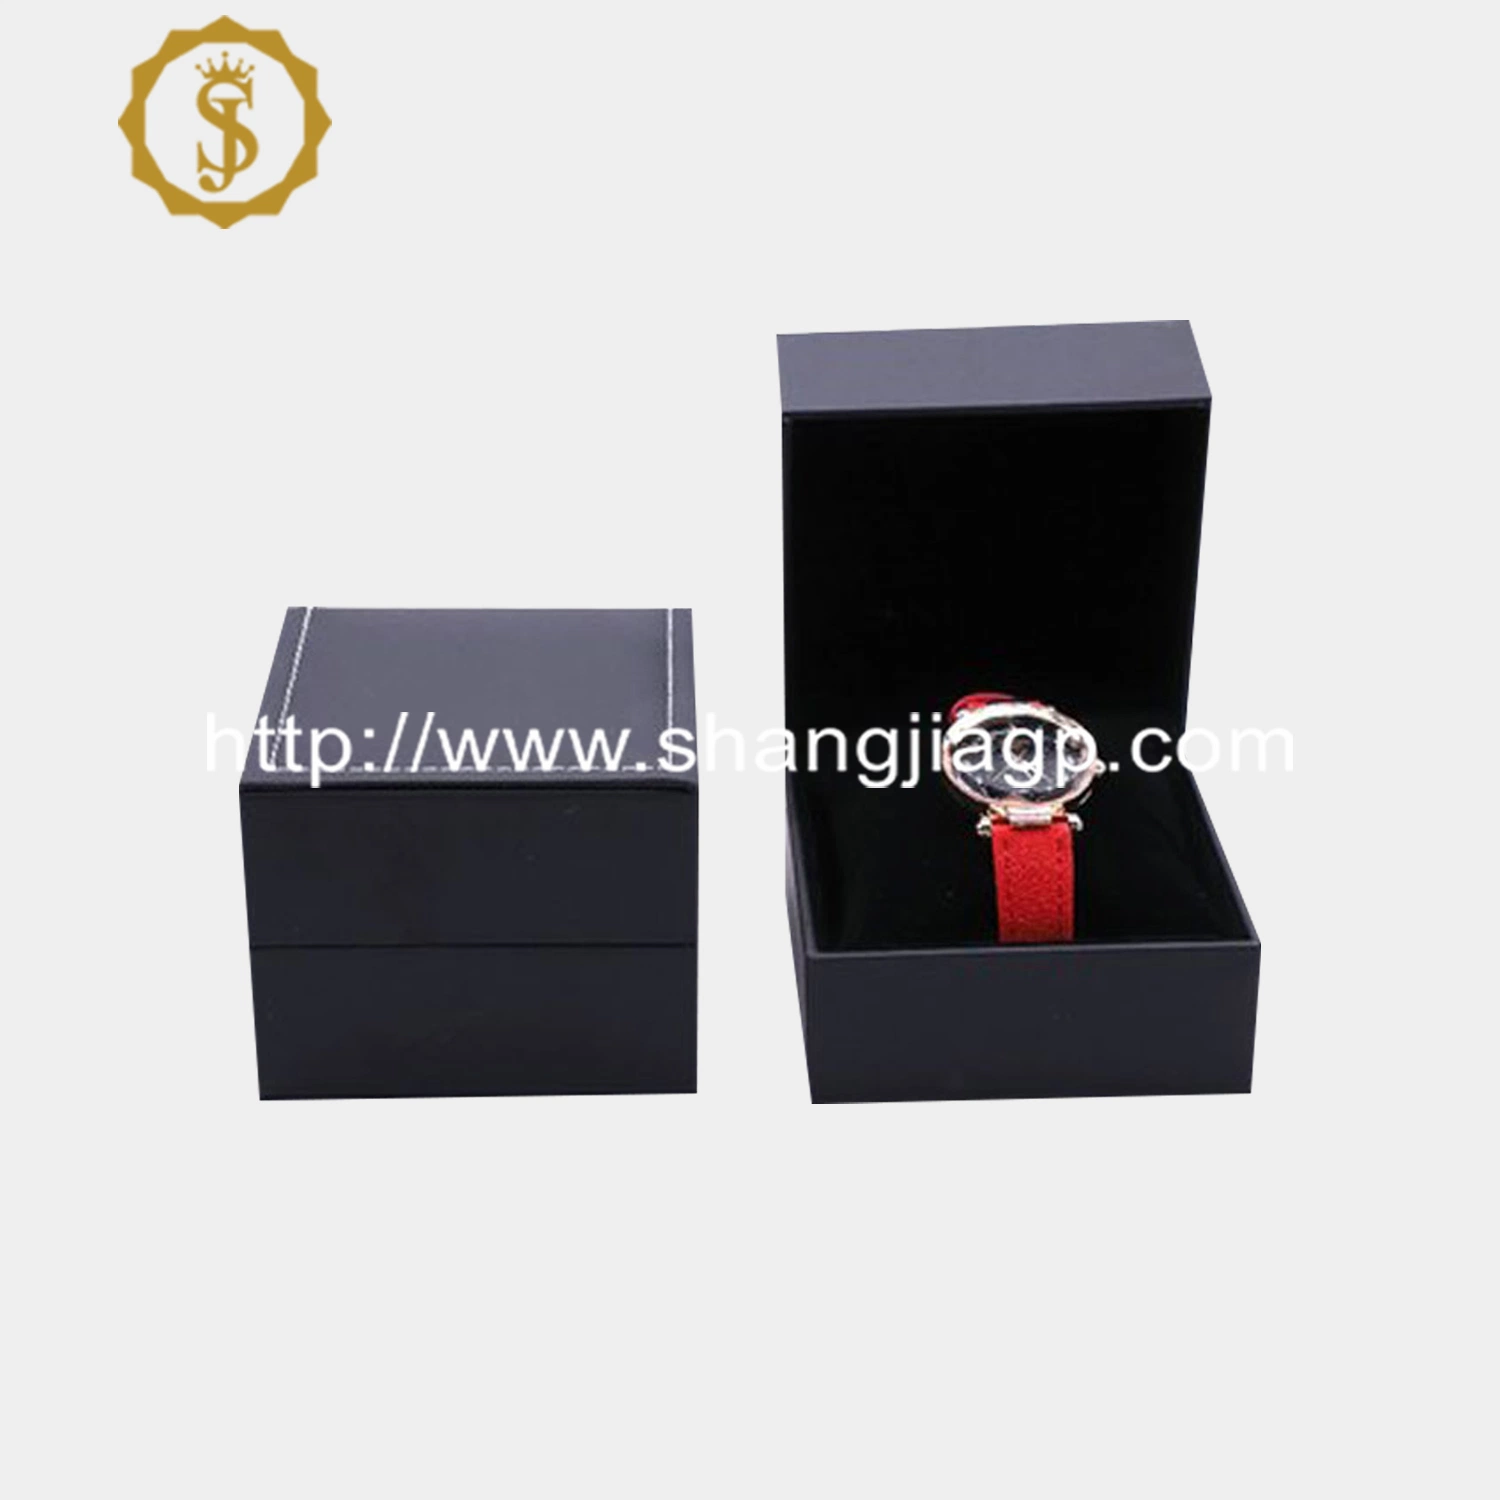 Luxury Watch and Ring Packaging Box Black Logo PU Leather High quality/High cost performance  Single Luxury Watch Case Box with 'cusion